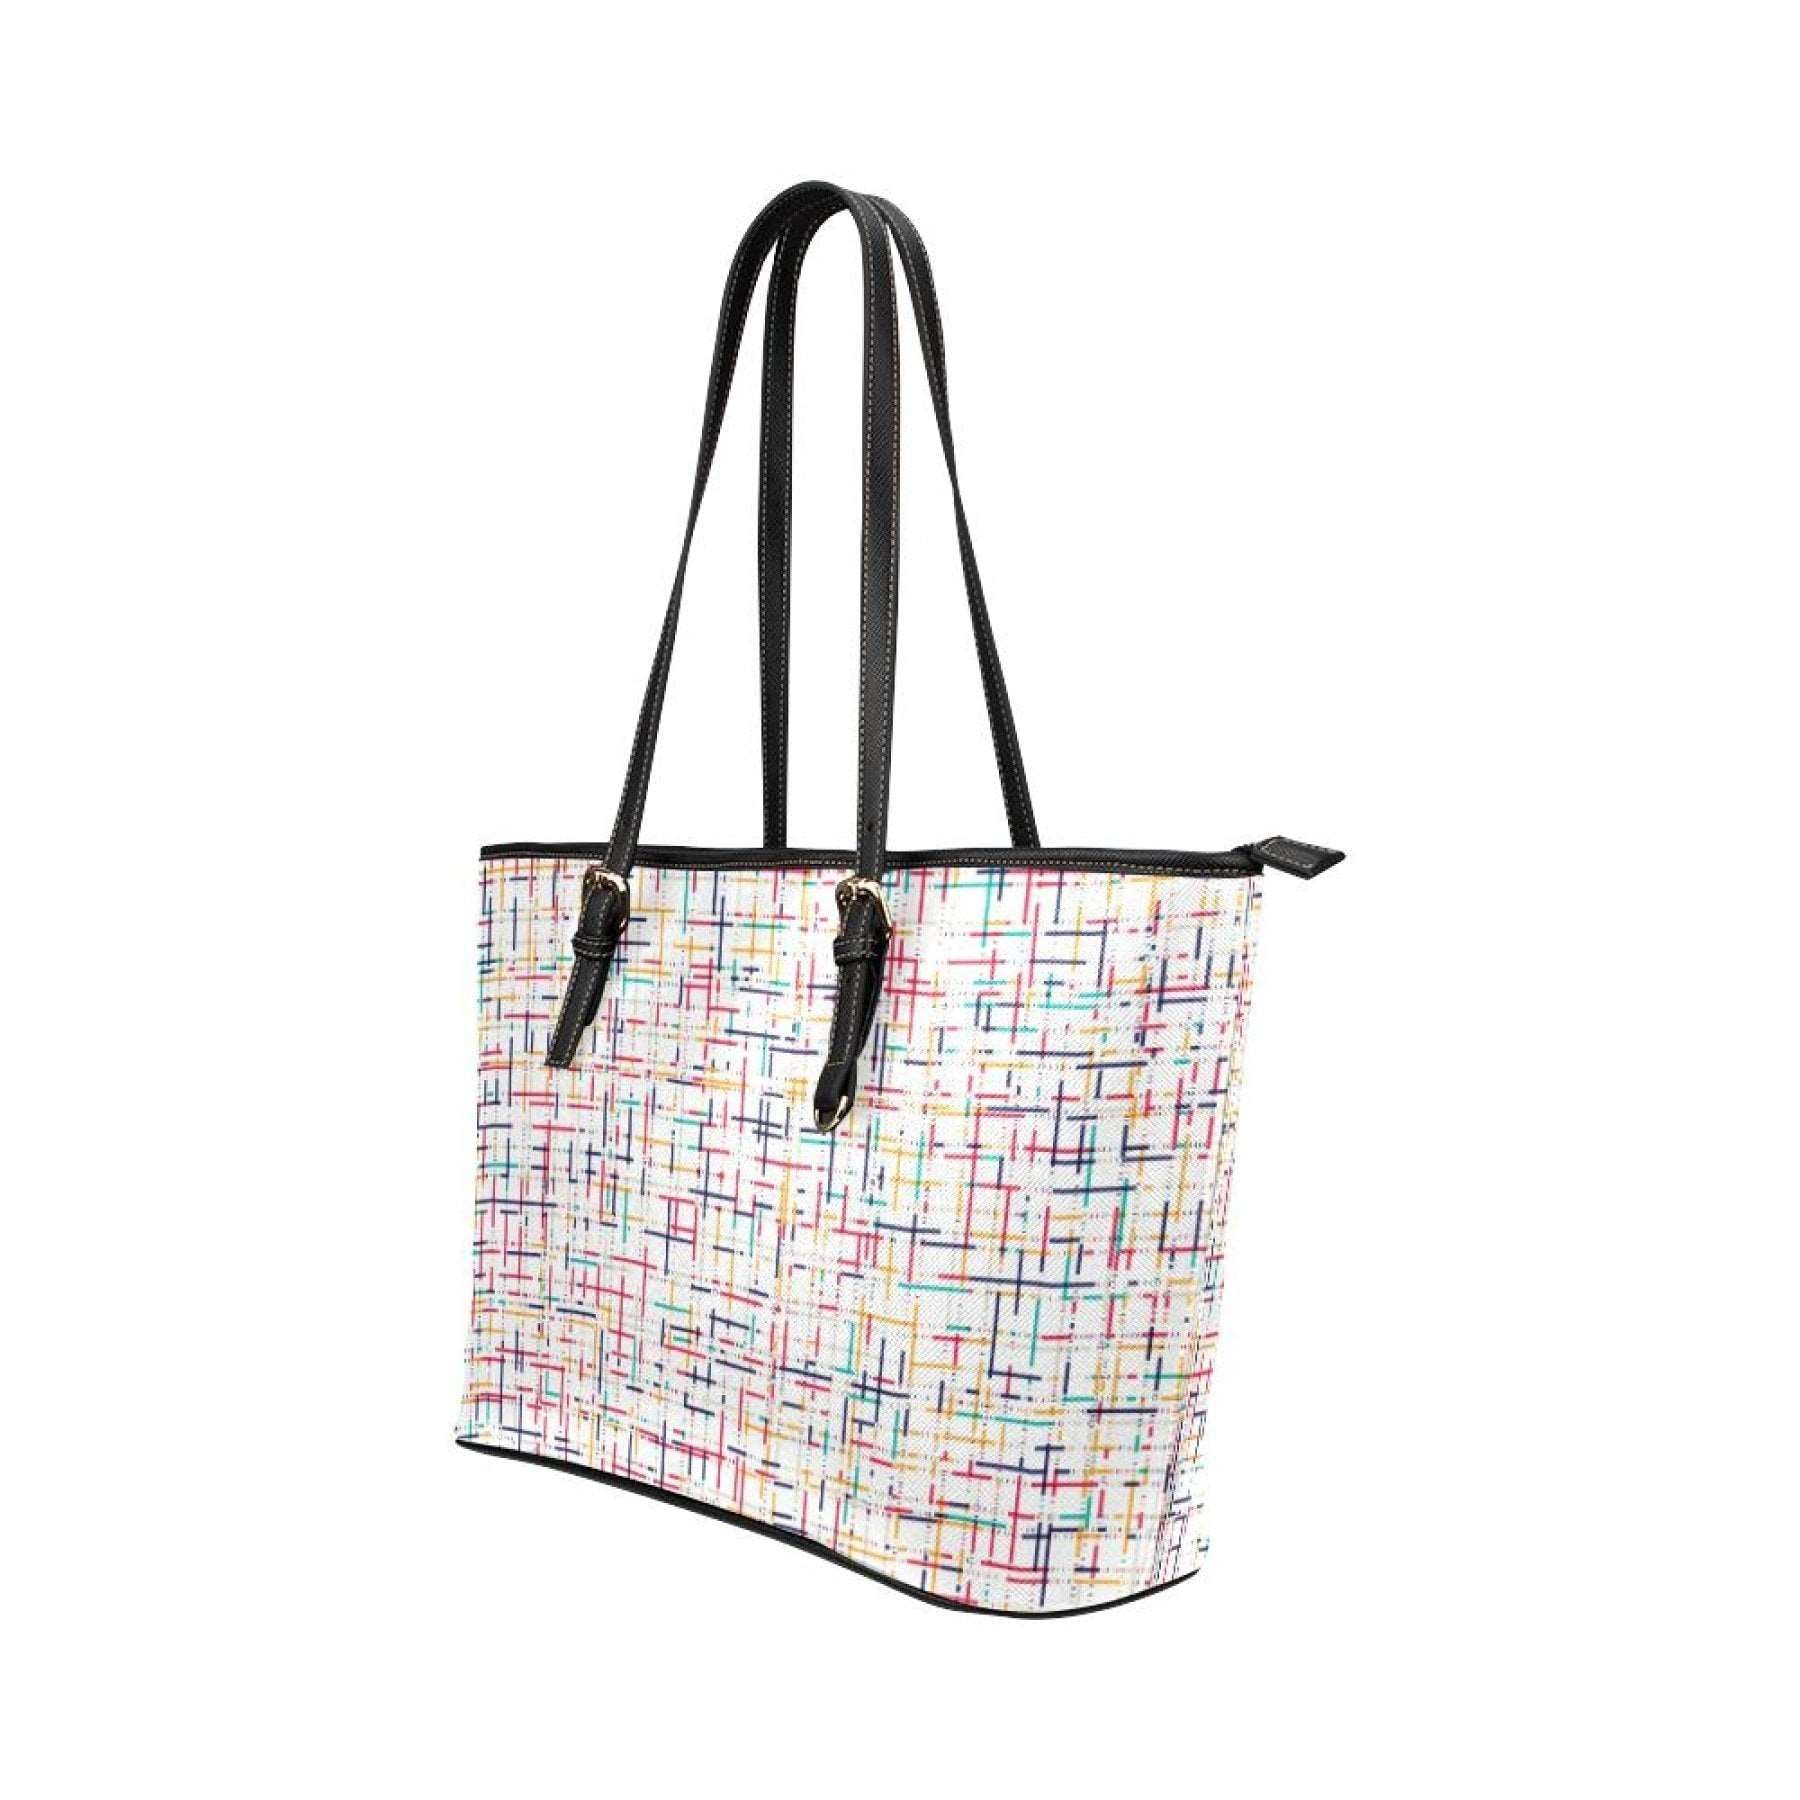 Tote Bags, White Colorful Stripes Style Bag - Ecombran Limited